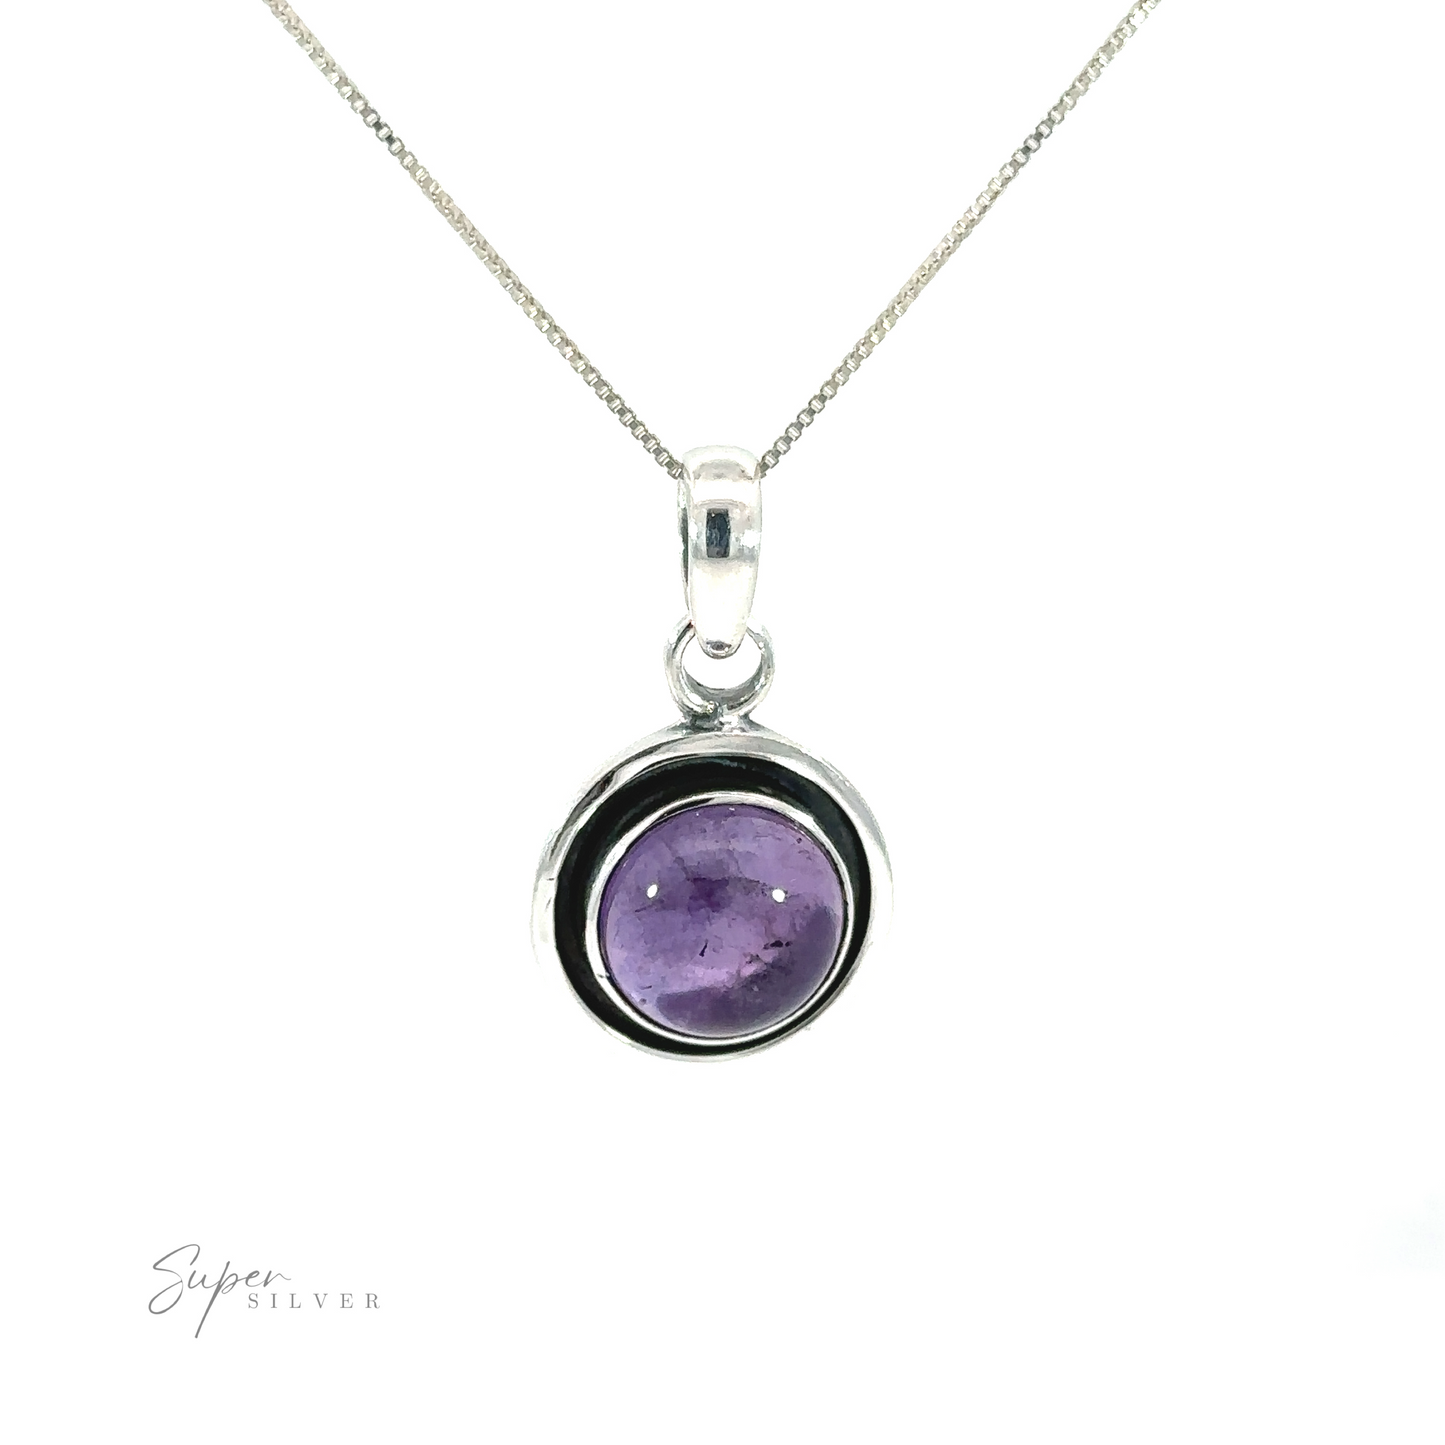 Contemporary flair meets oxidized edge in this Minimalist Round Gemstone Pendant crafted in sterling silver.